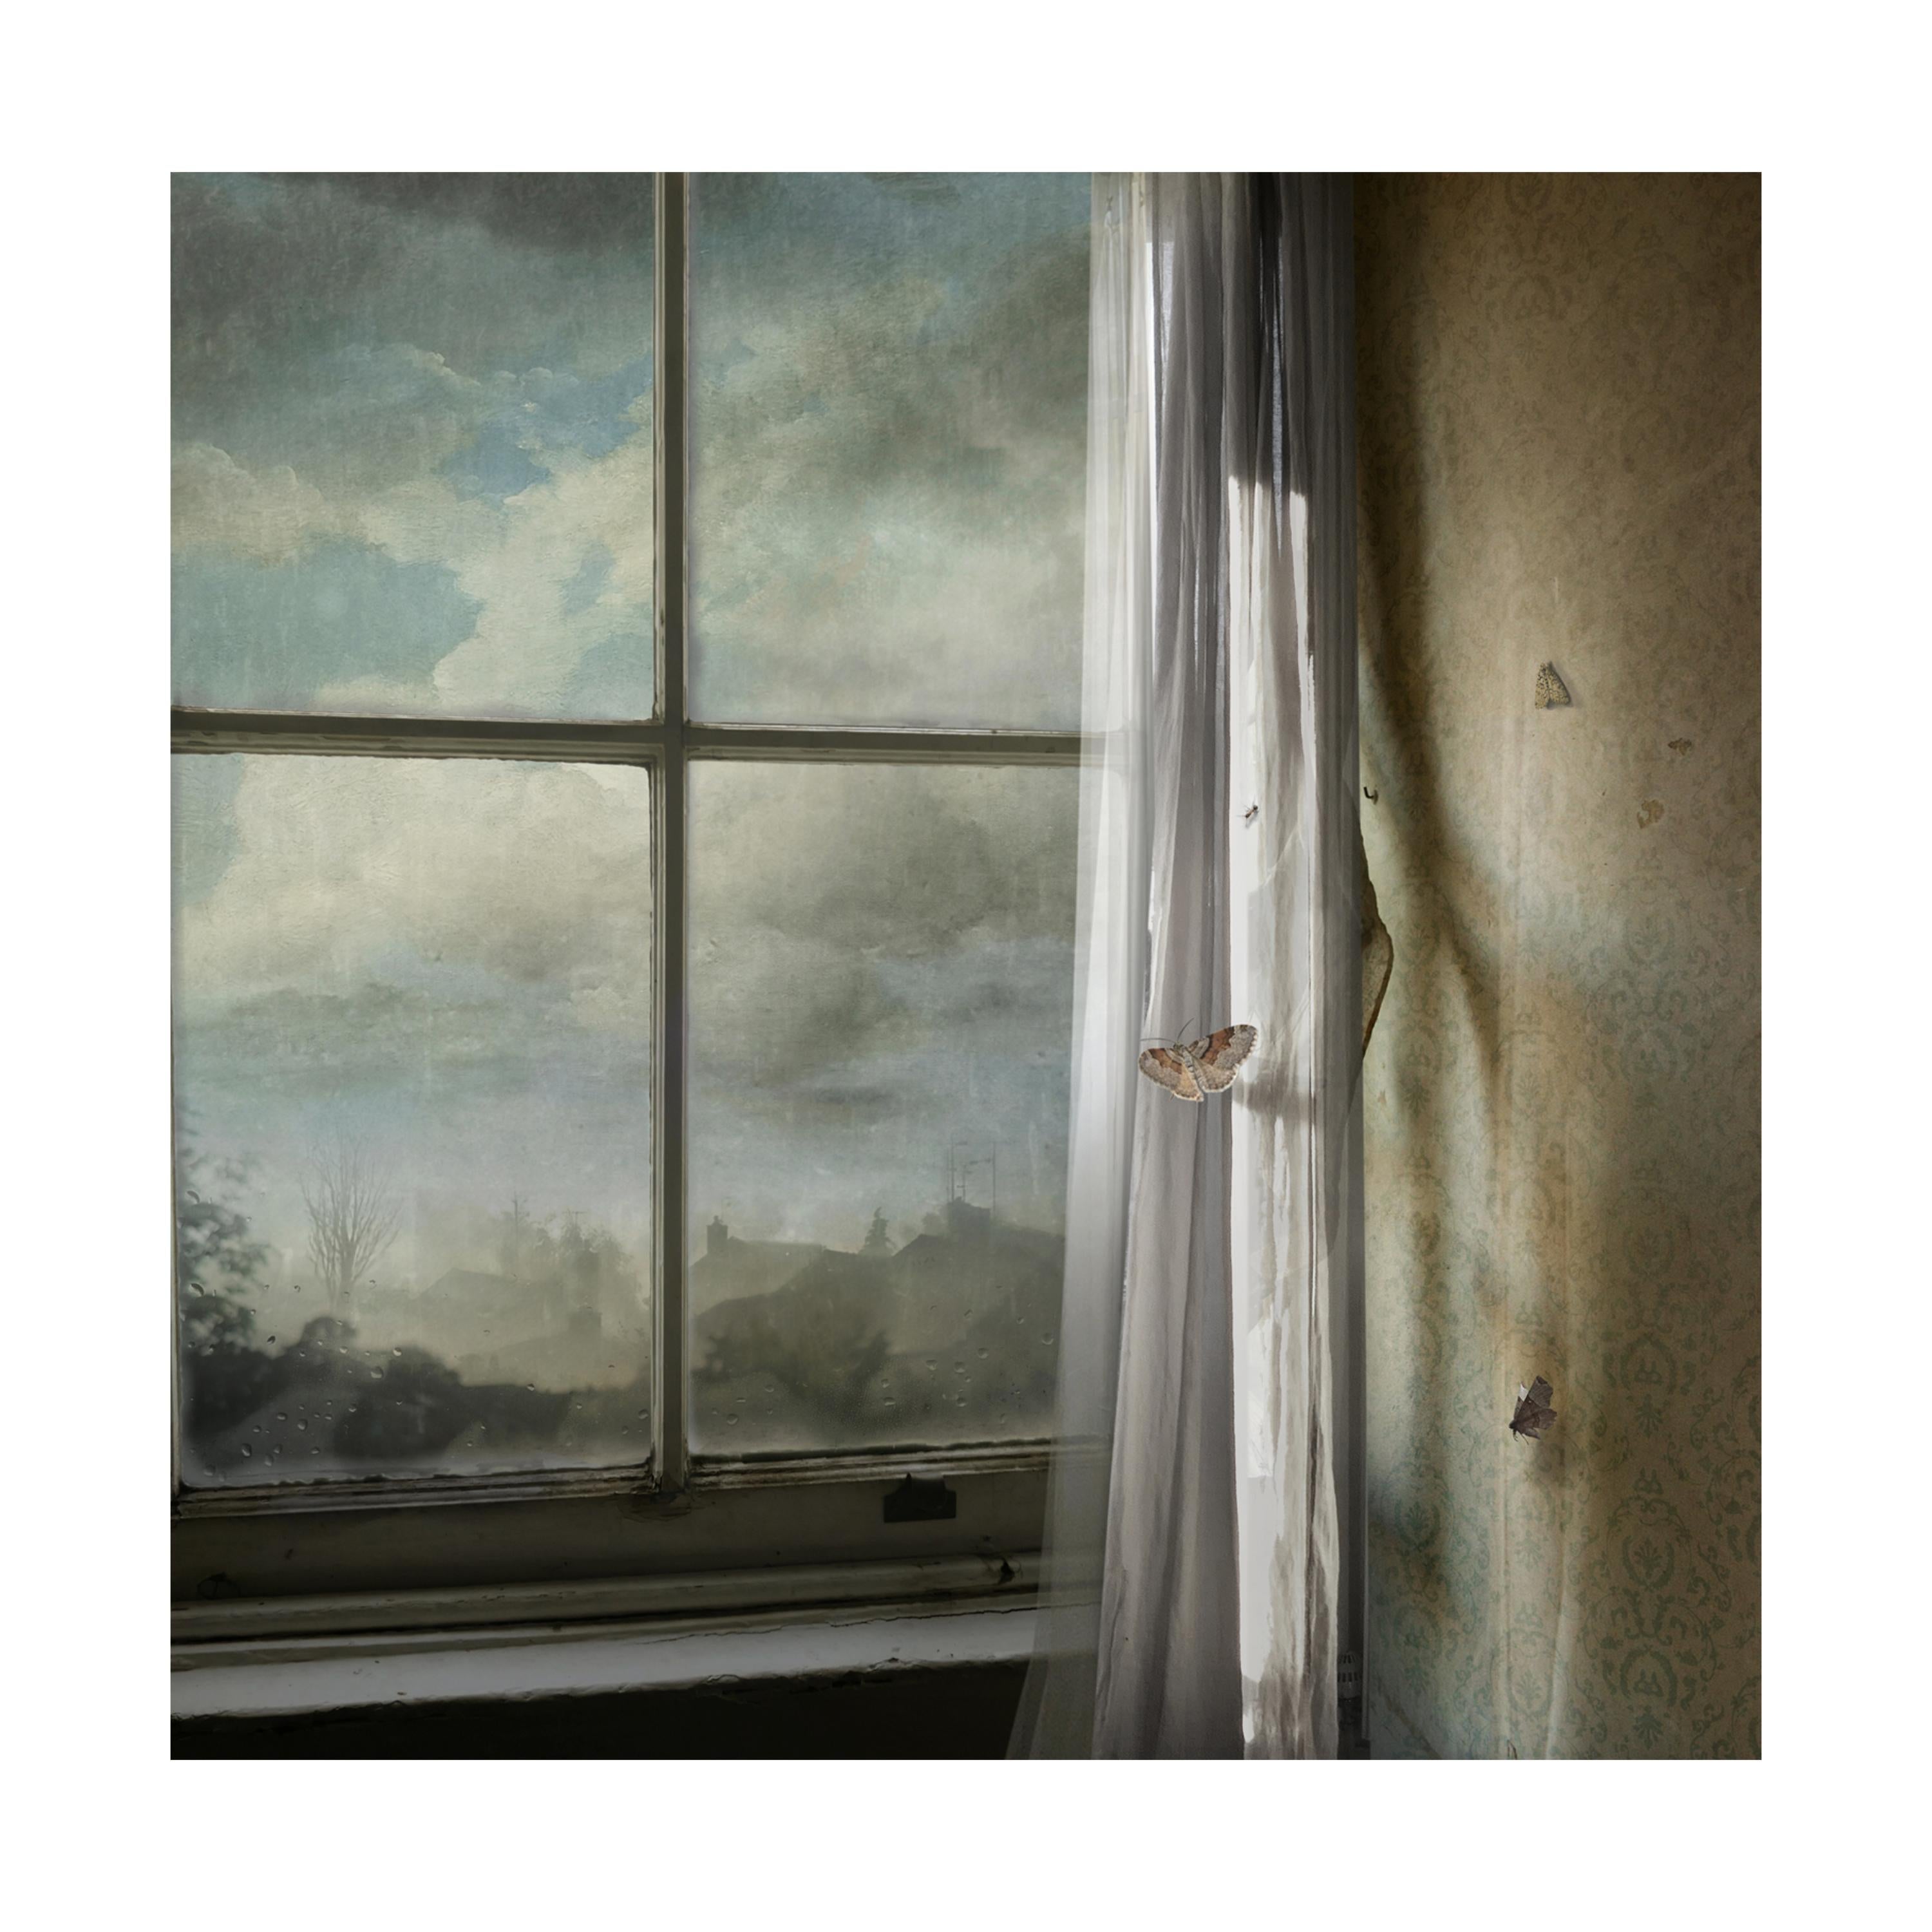 Aspect - Interior Photography, Butterfly Window, Landscape Photography - Gray Interior Print by Suzanne Moxhay